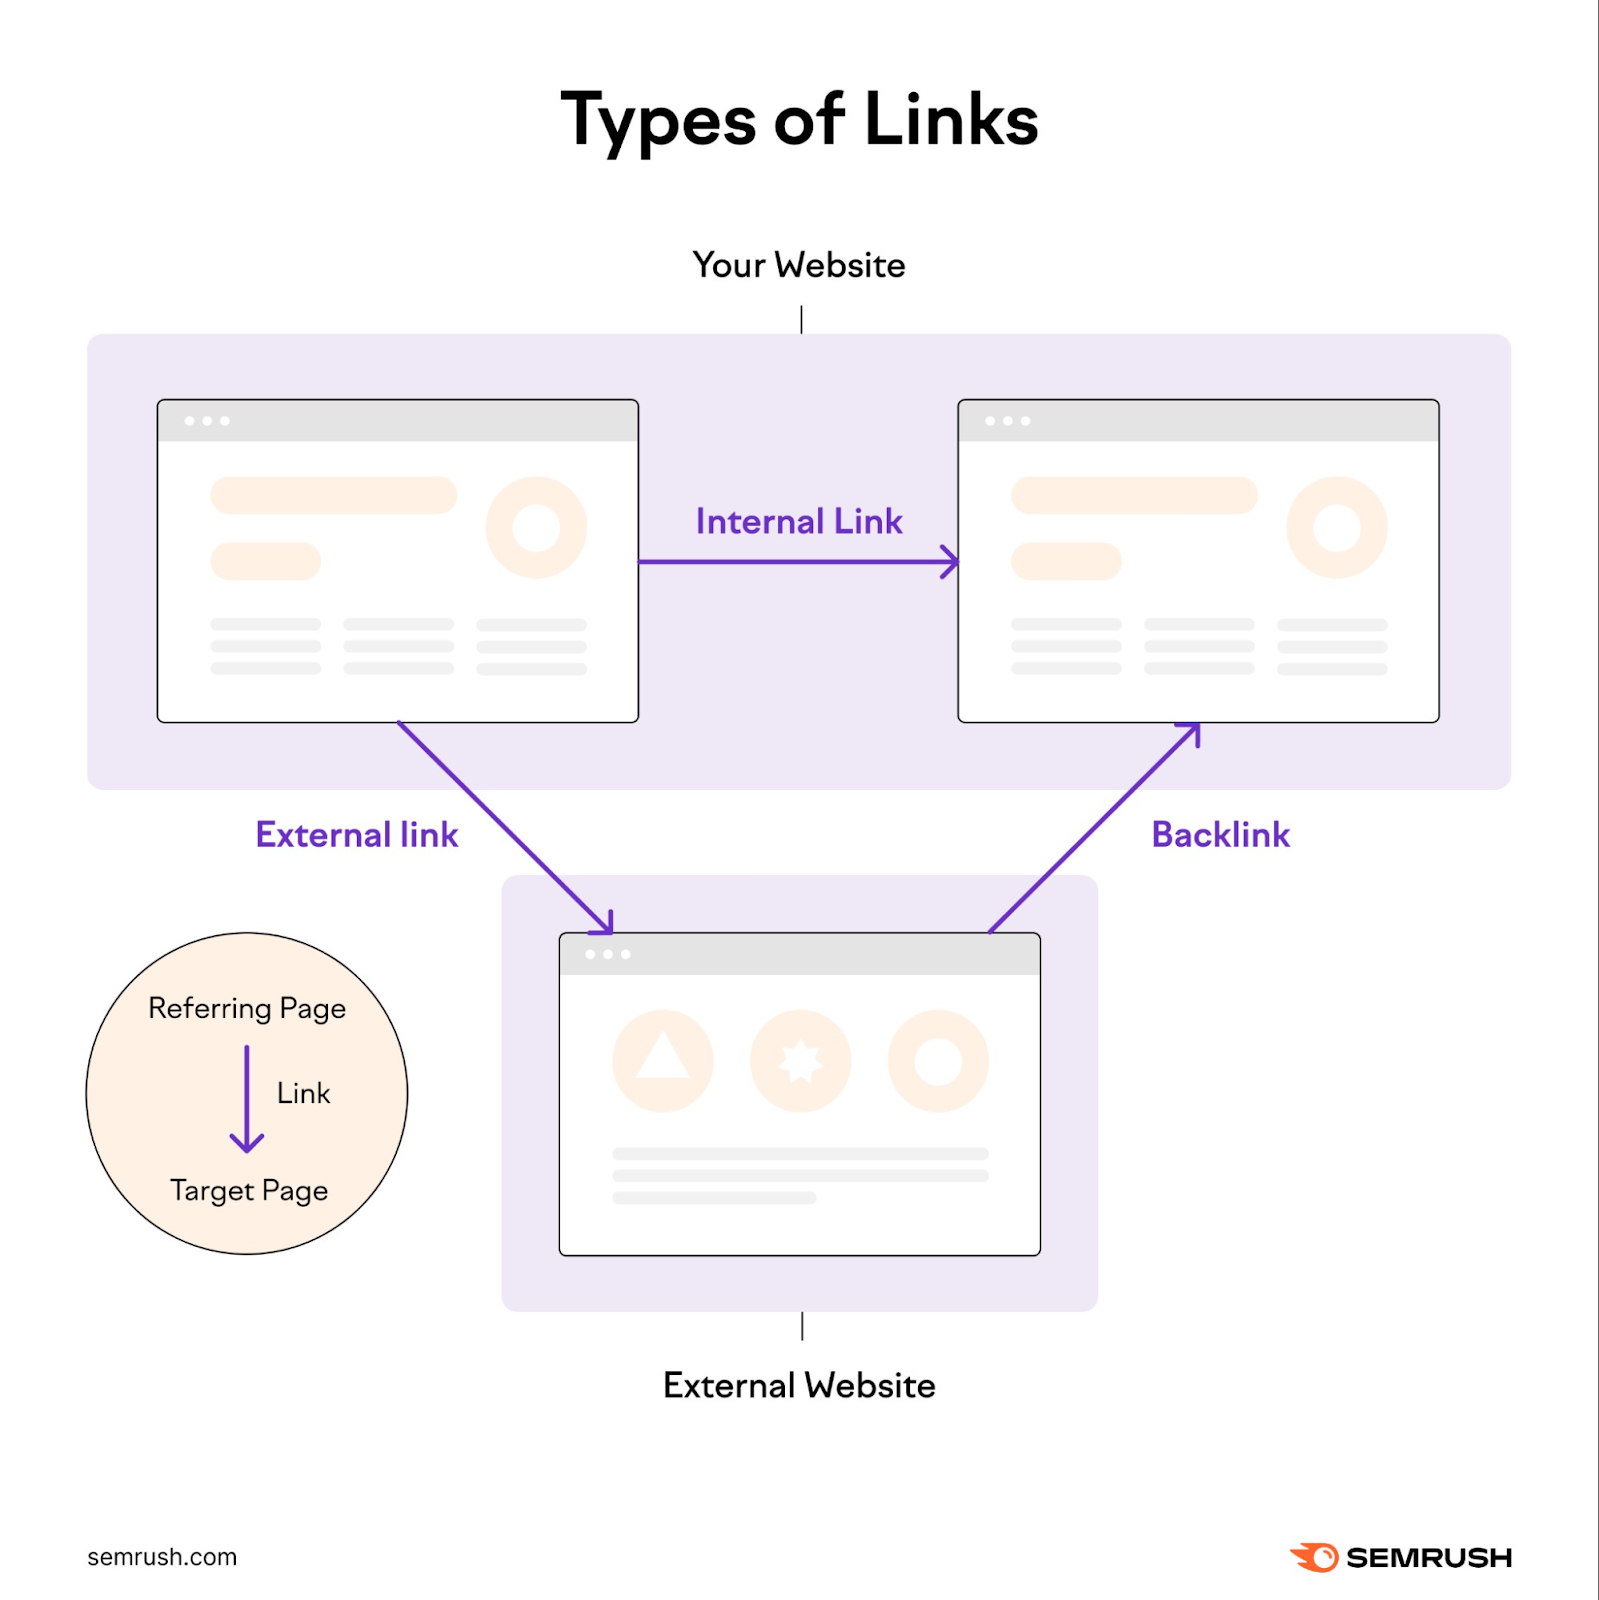 An infographic showing types of links